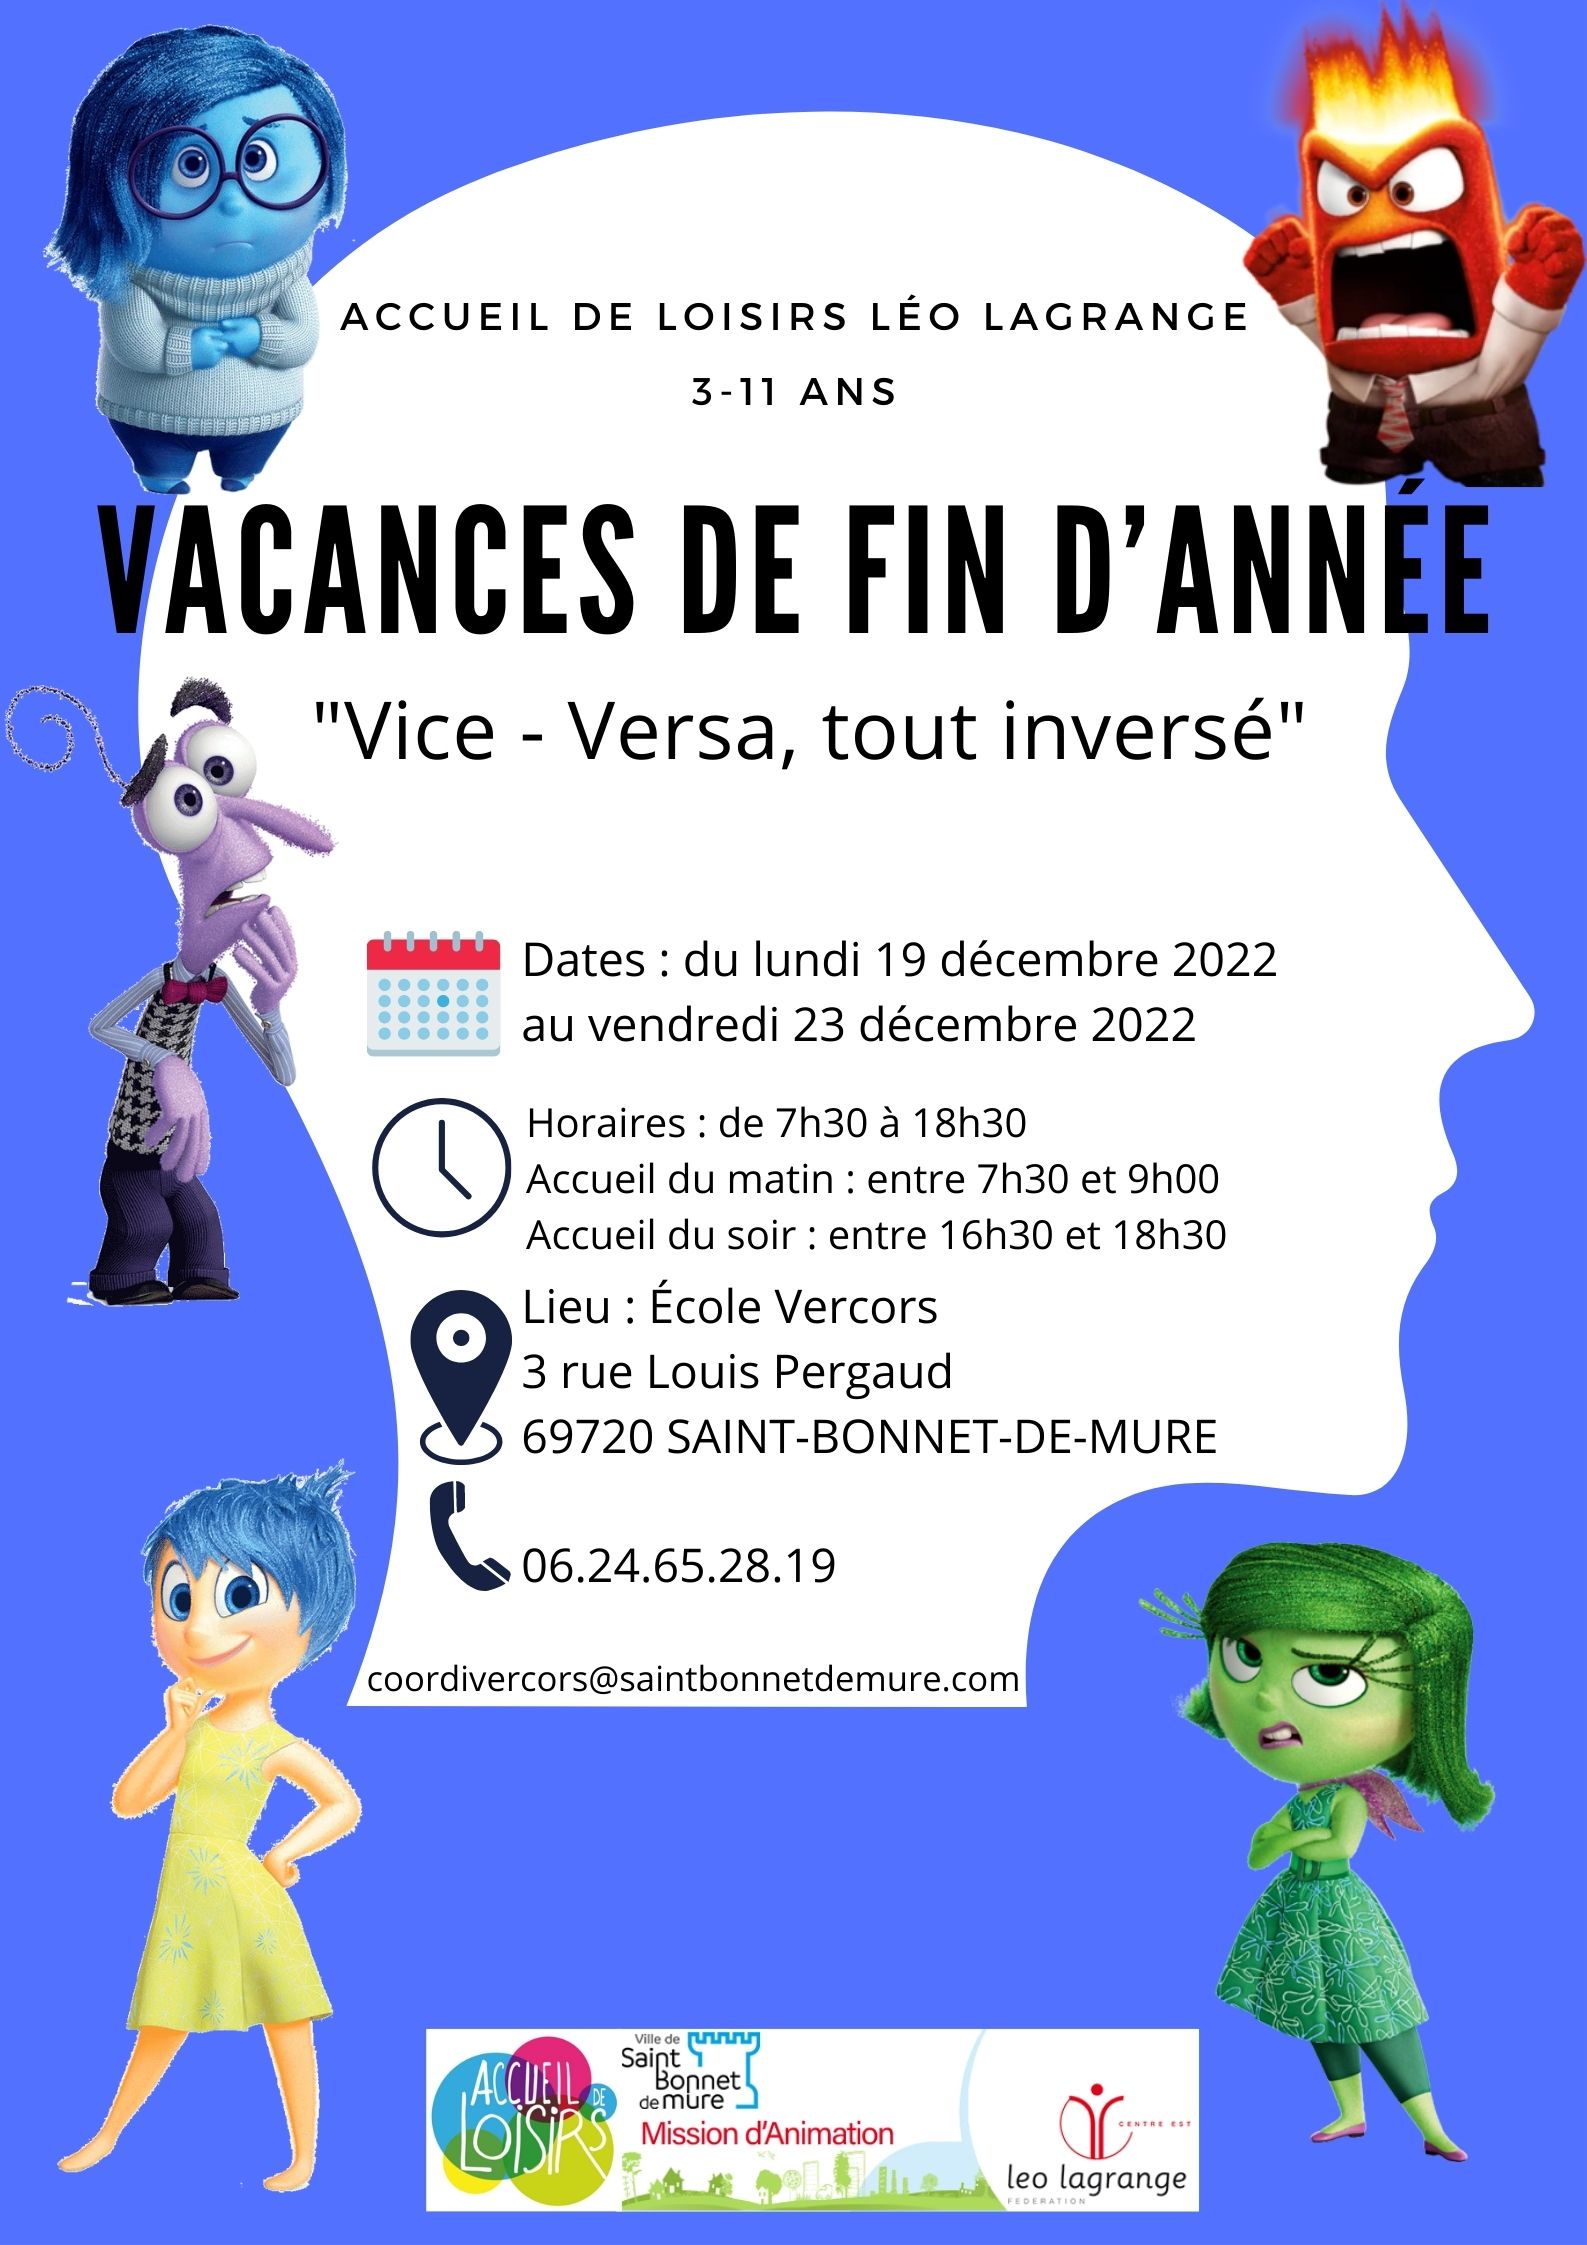 You are currently viewing Vacances de fin d’année 2022